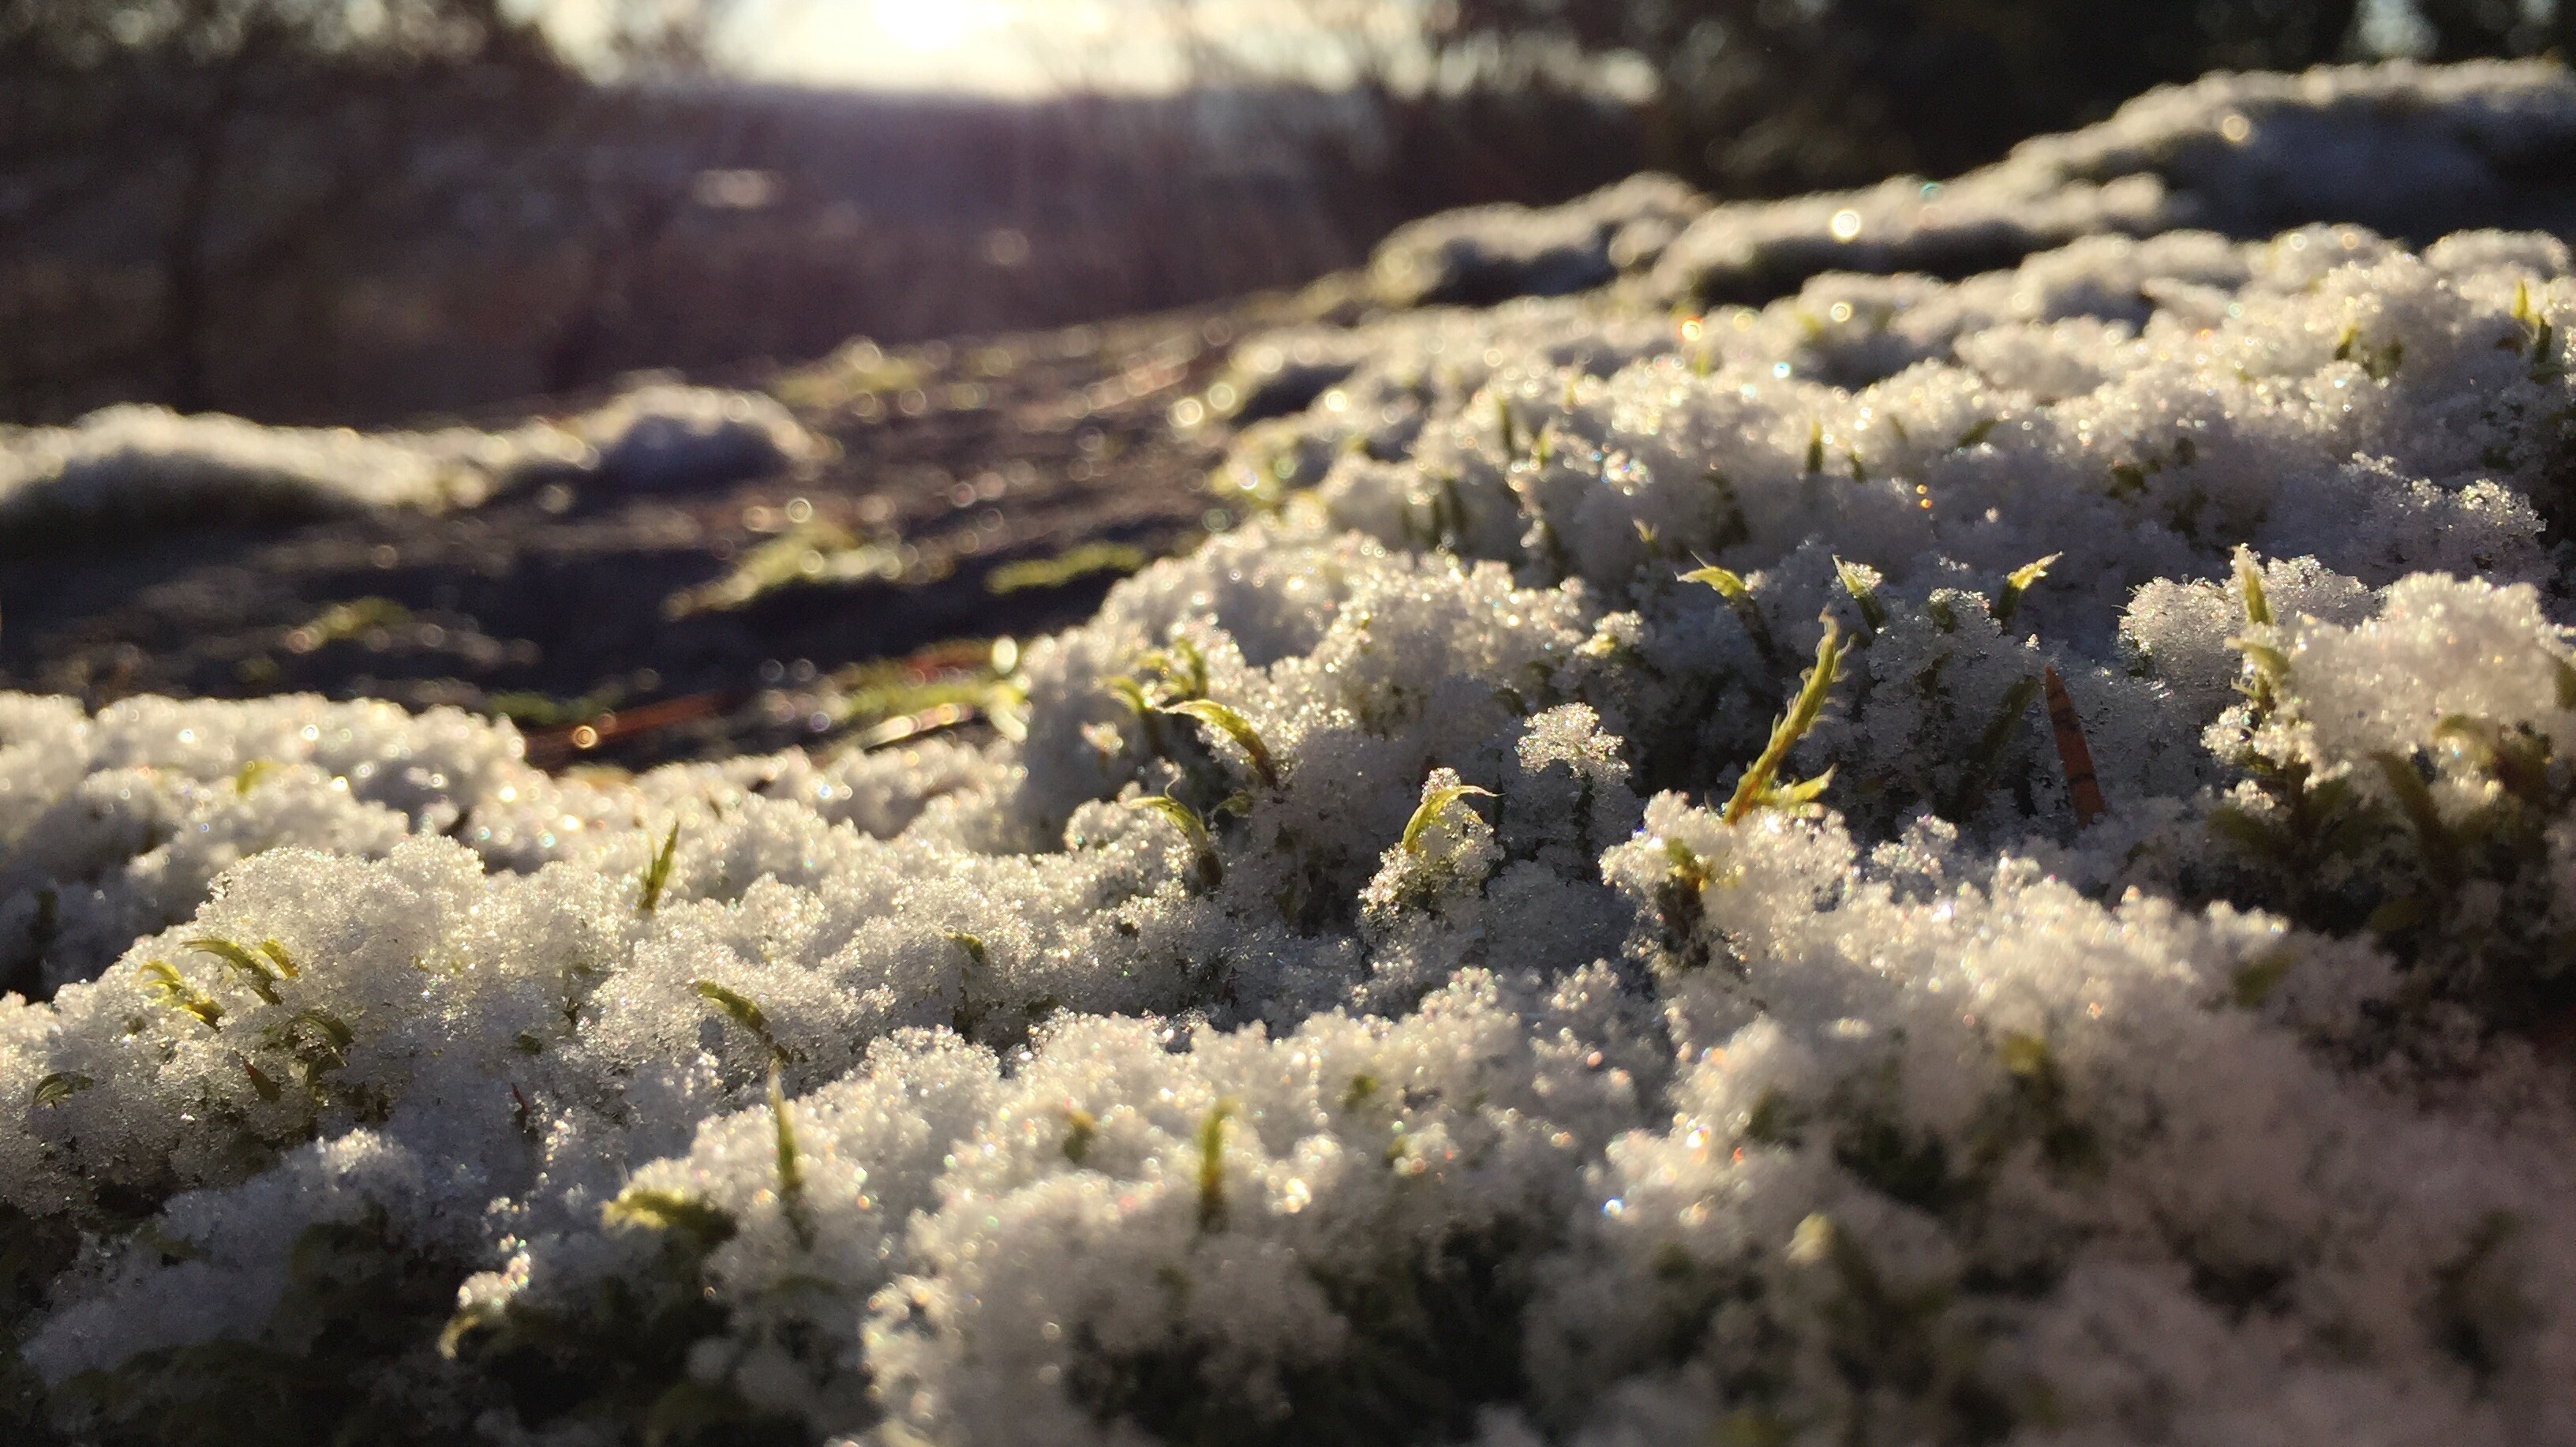 General 3264x1833 nature snow plants outdoors winter